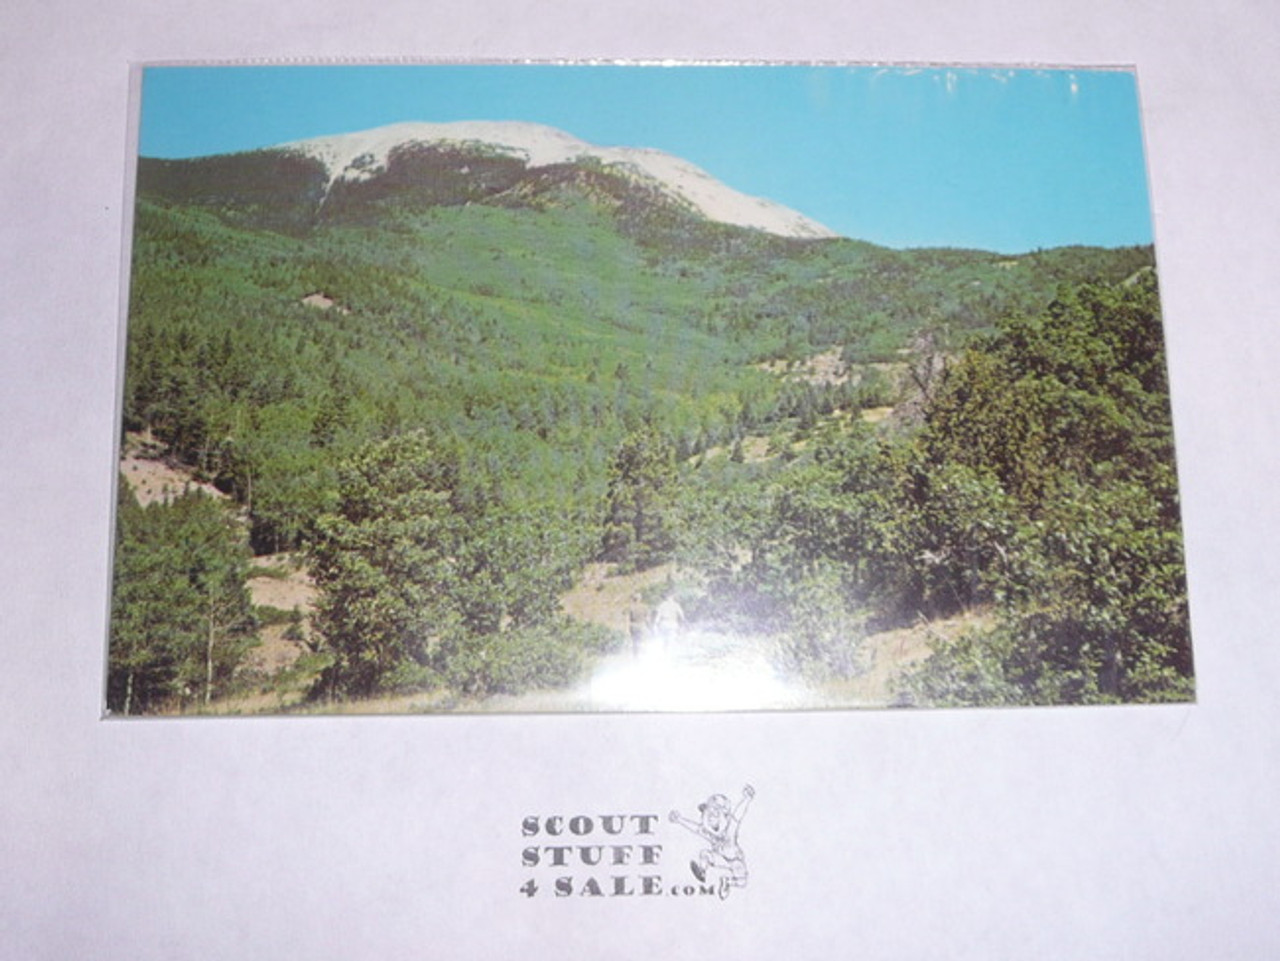 Philmont Scout Ranch Post card, Philmont High Adventure Country, 1950's-80's